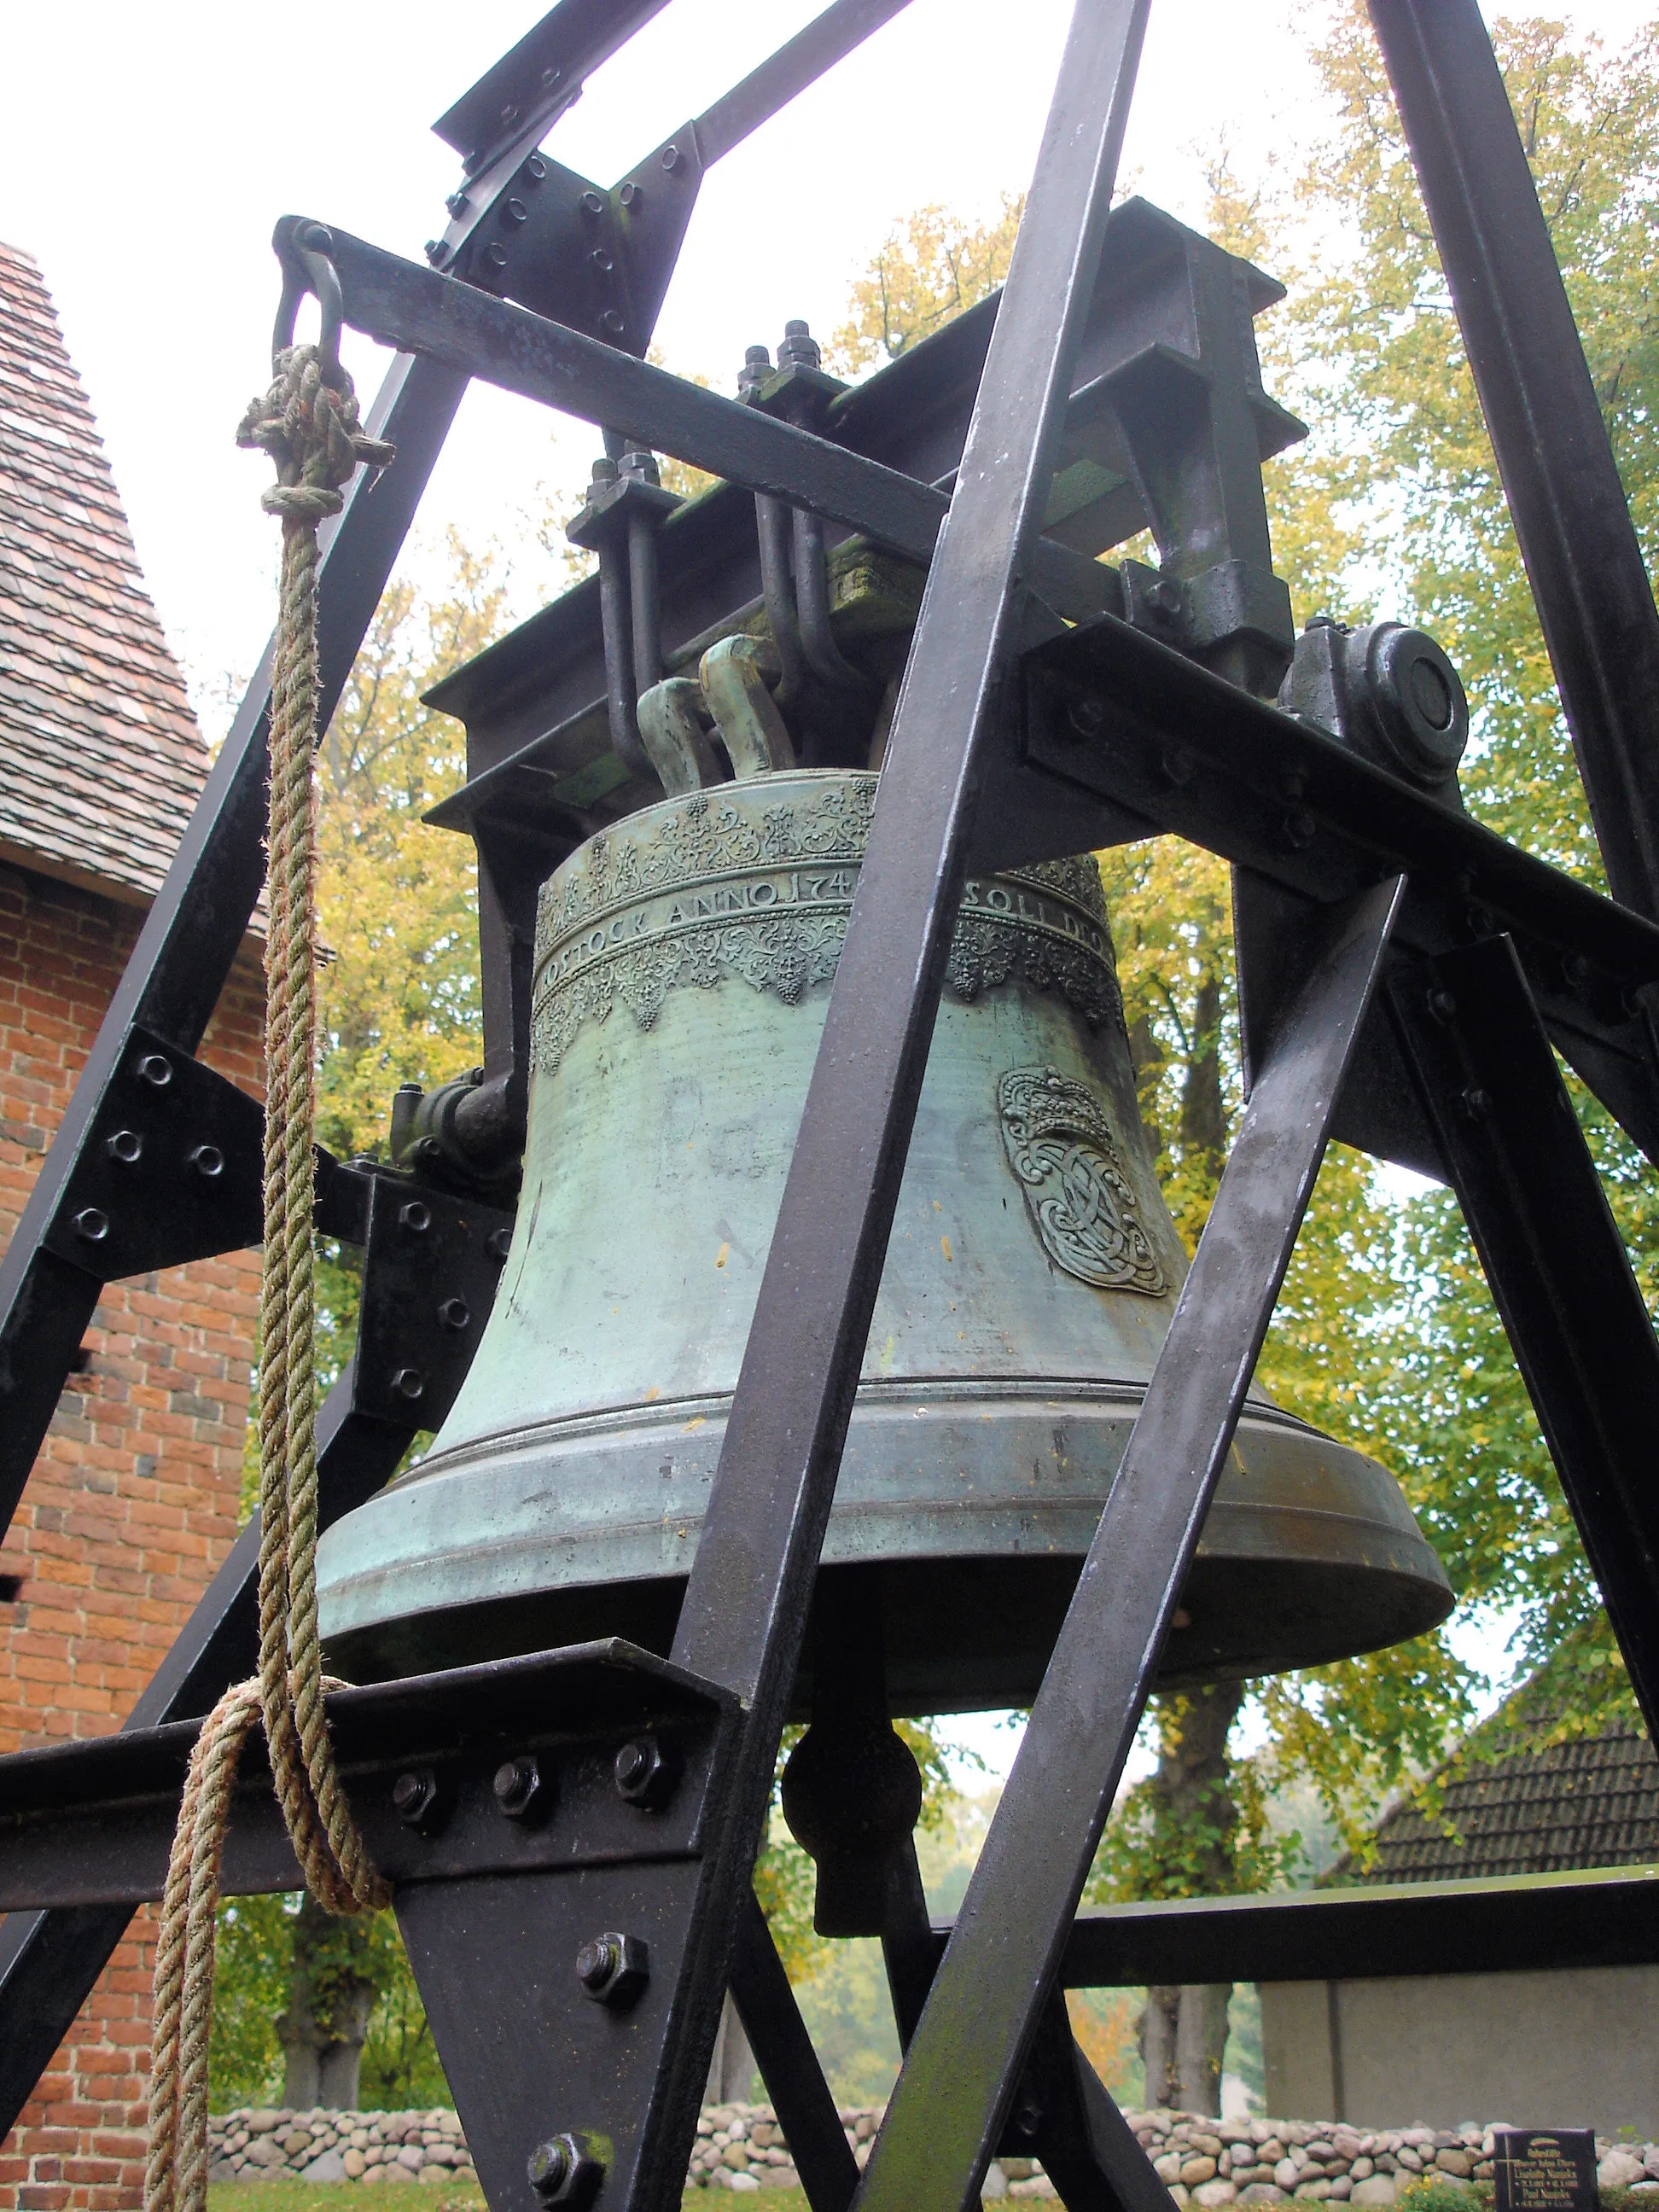 Photo showing: Churchbell in Passee, Mecklenburg, Germany